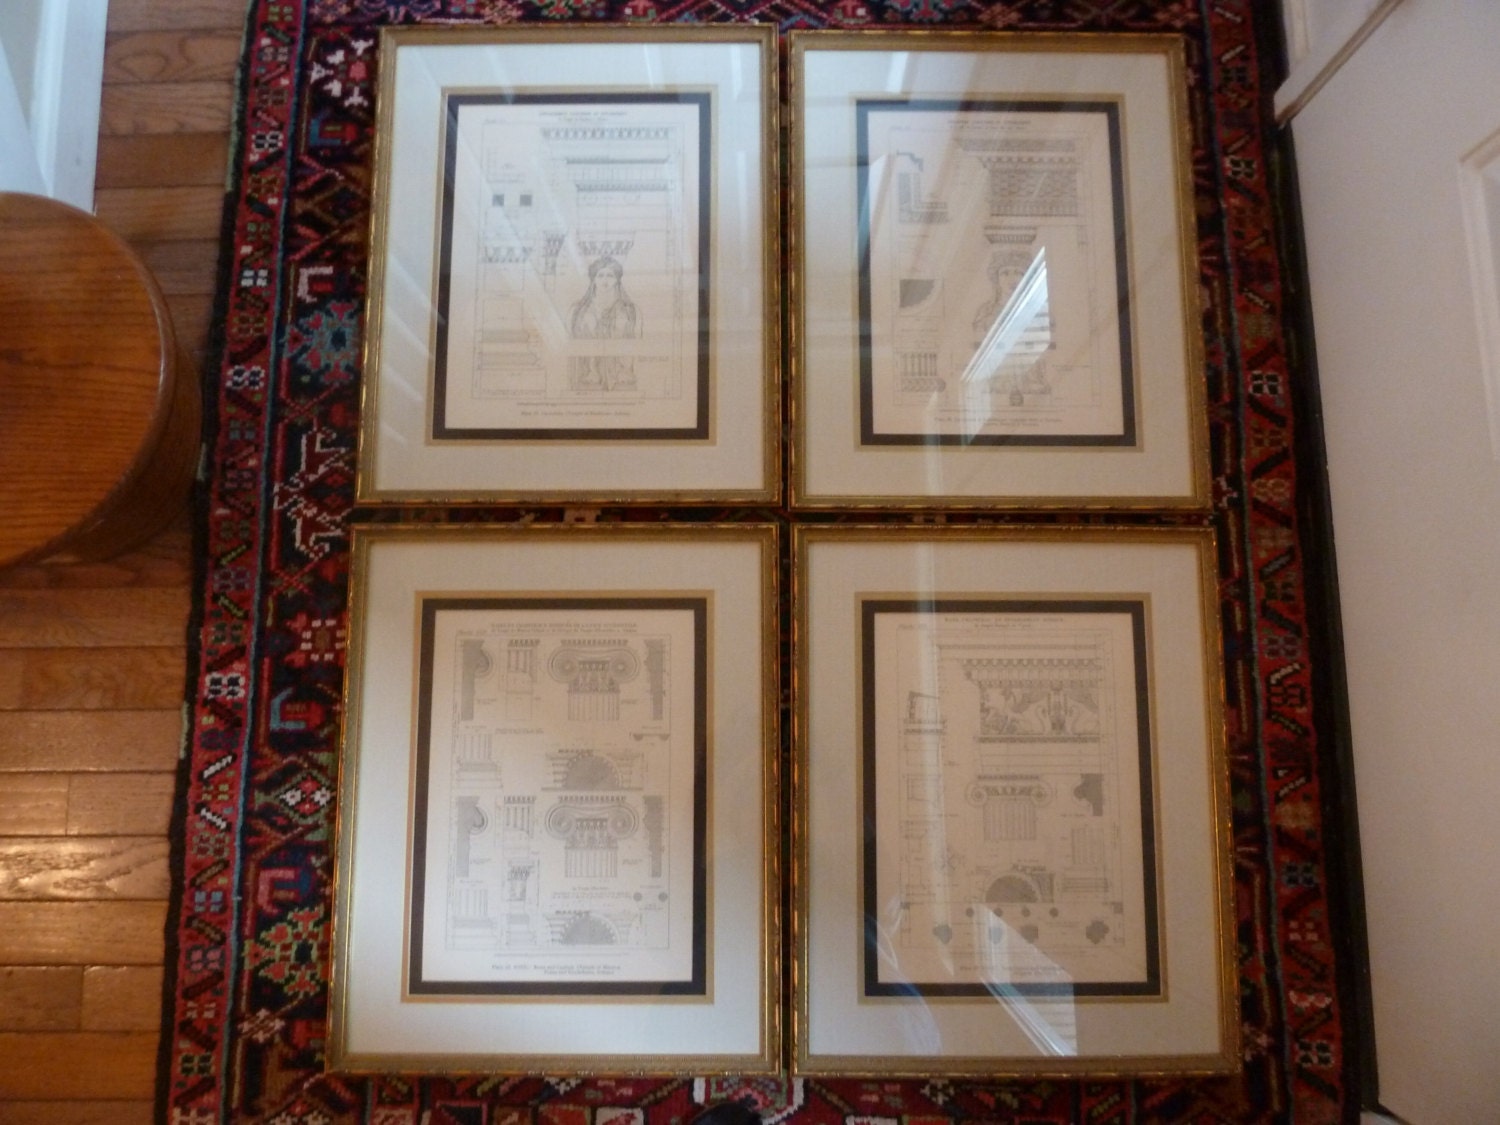 Architectural Drawings Vintage Architectural Book Plates